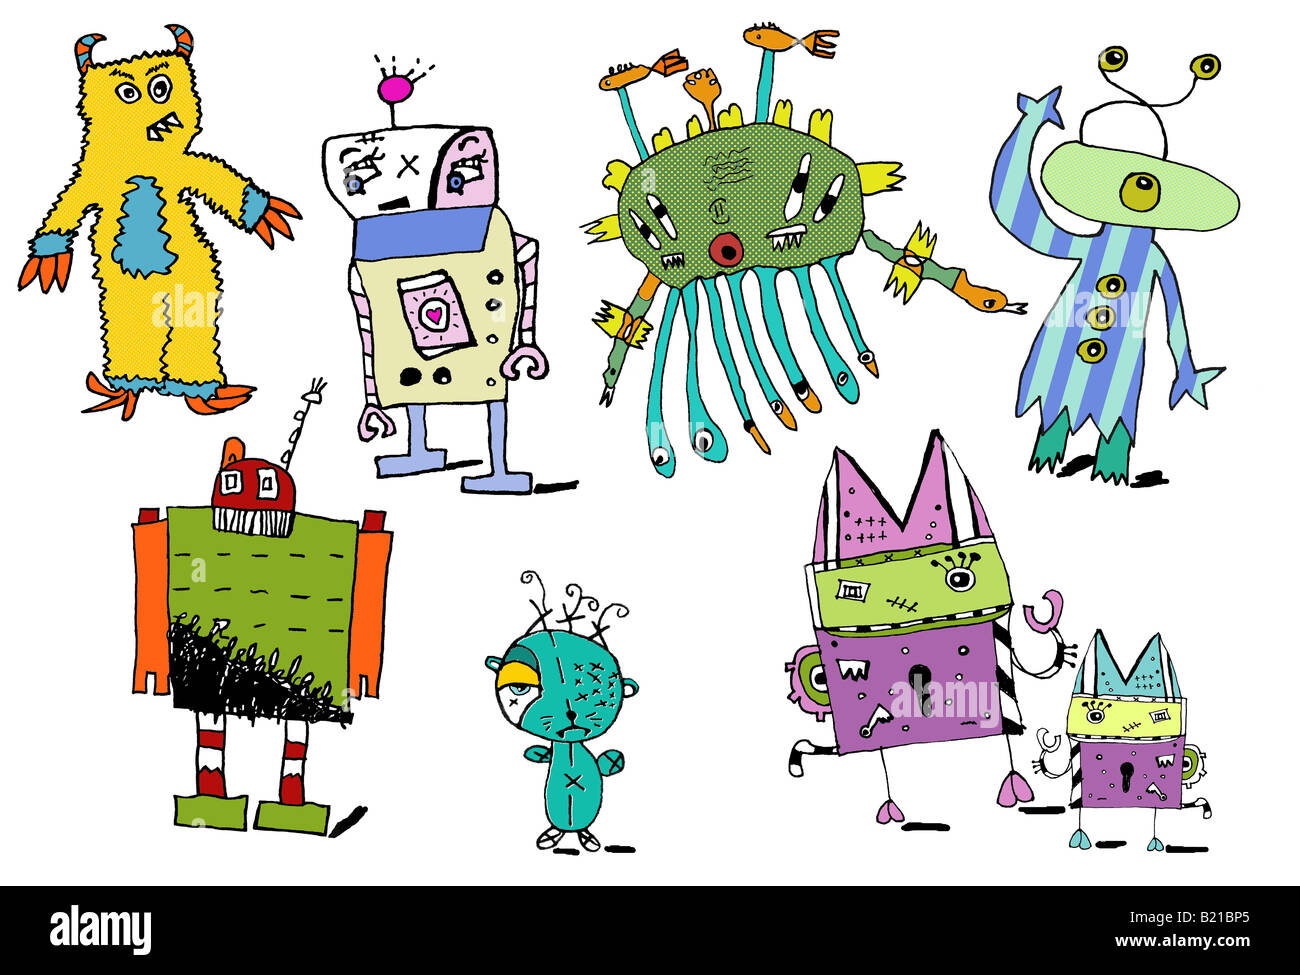 Children's style illustrations of Monsters, Robots and Creatures. Stock Photo